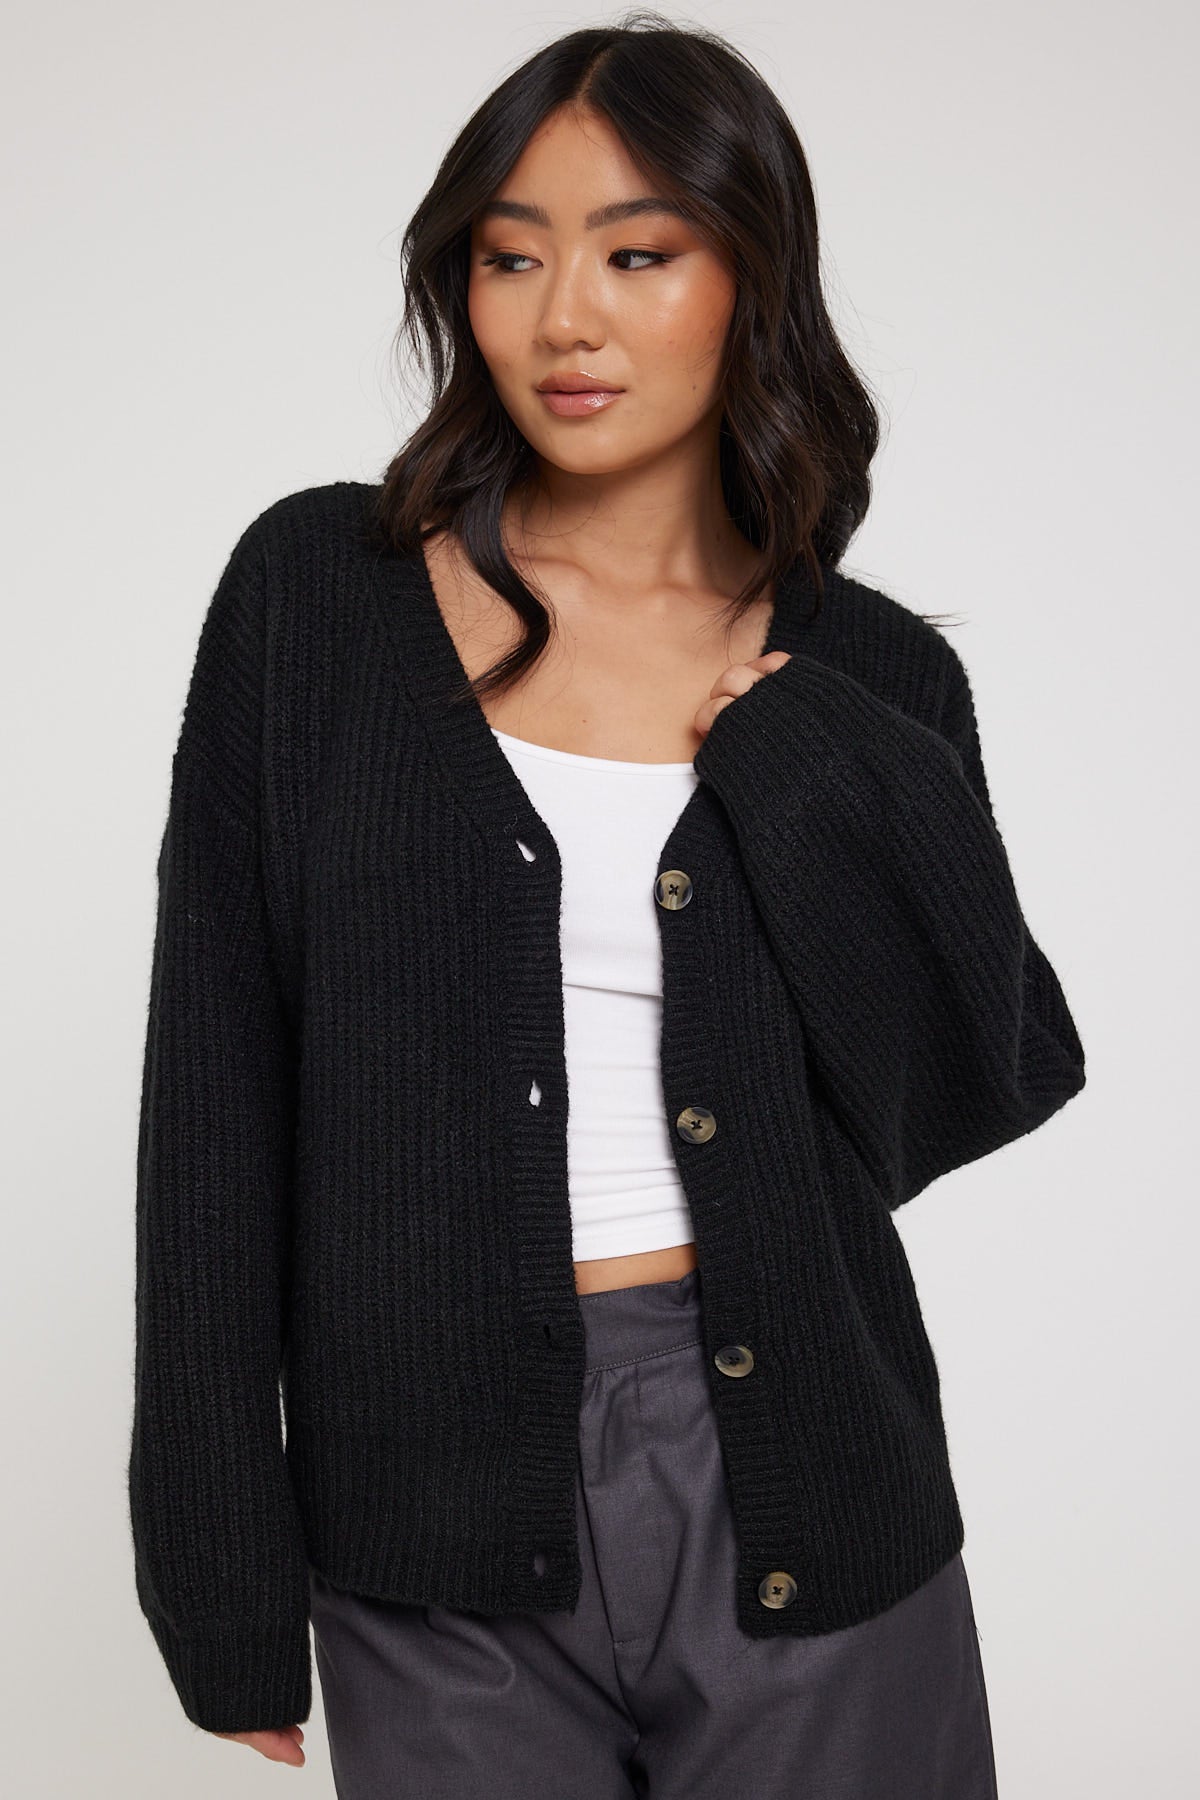 All About Eve Belle Knit Cardigan Black